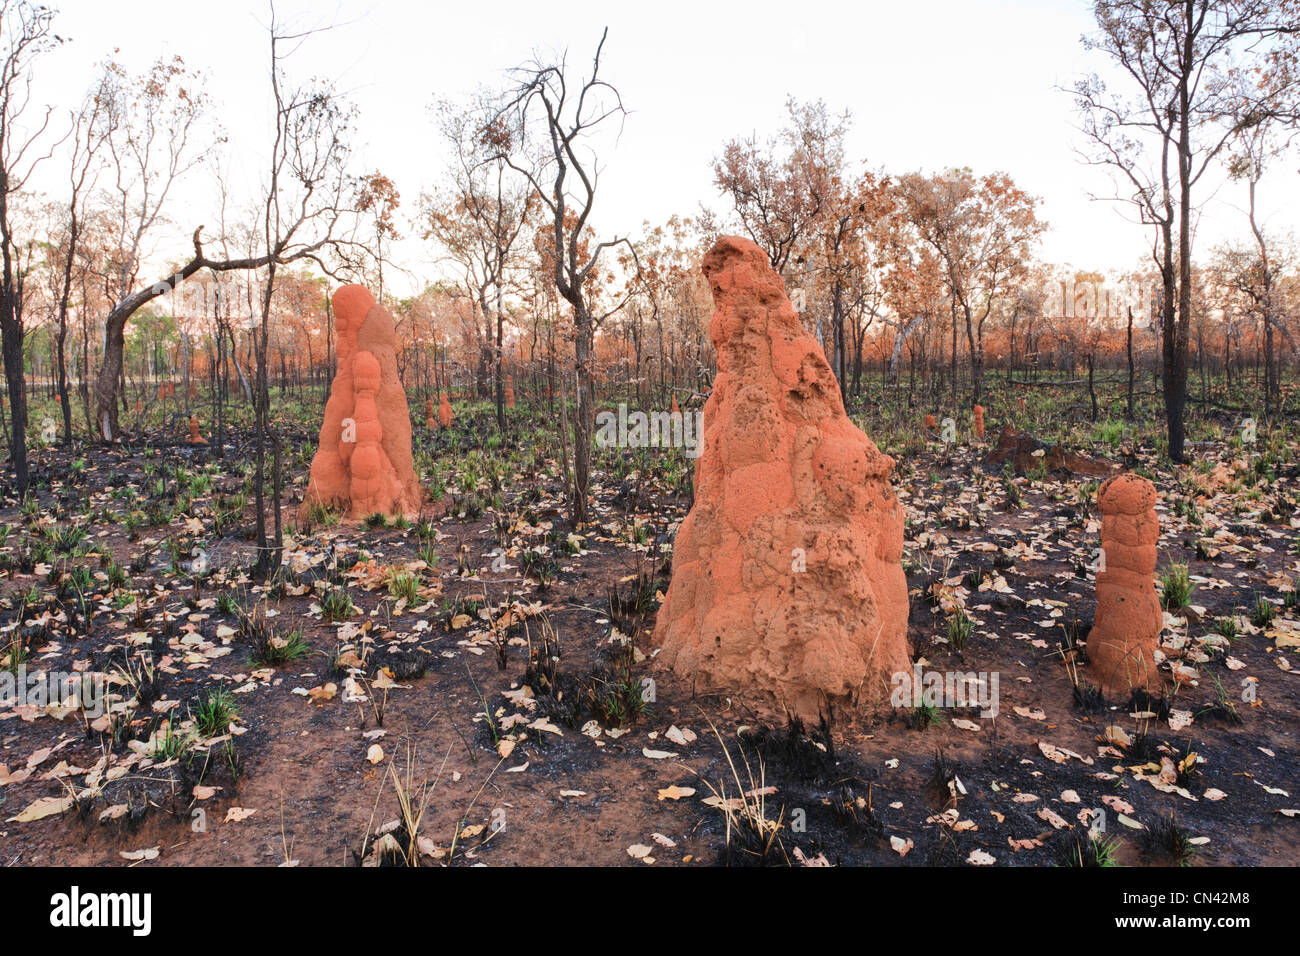 Termite mound in an area of outback Northern Territory, Australia, which has been burned by bush fire. Stock Photo